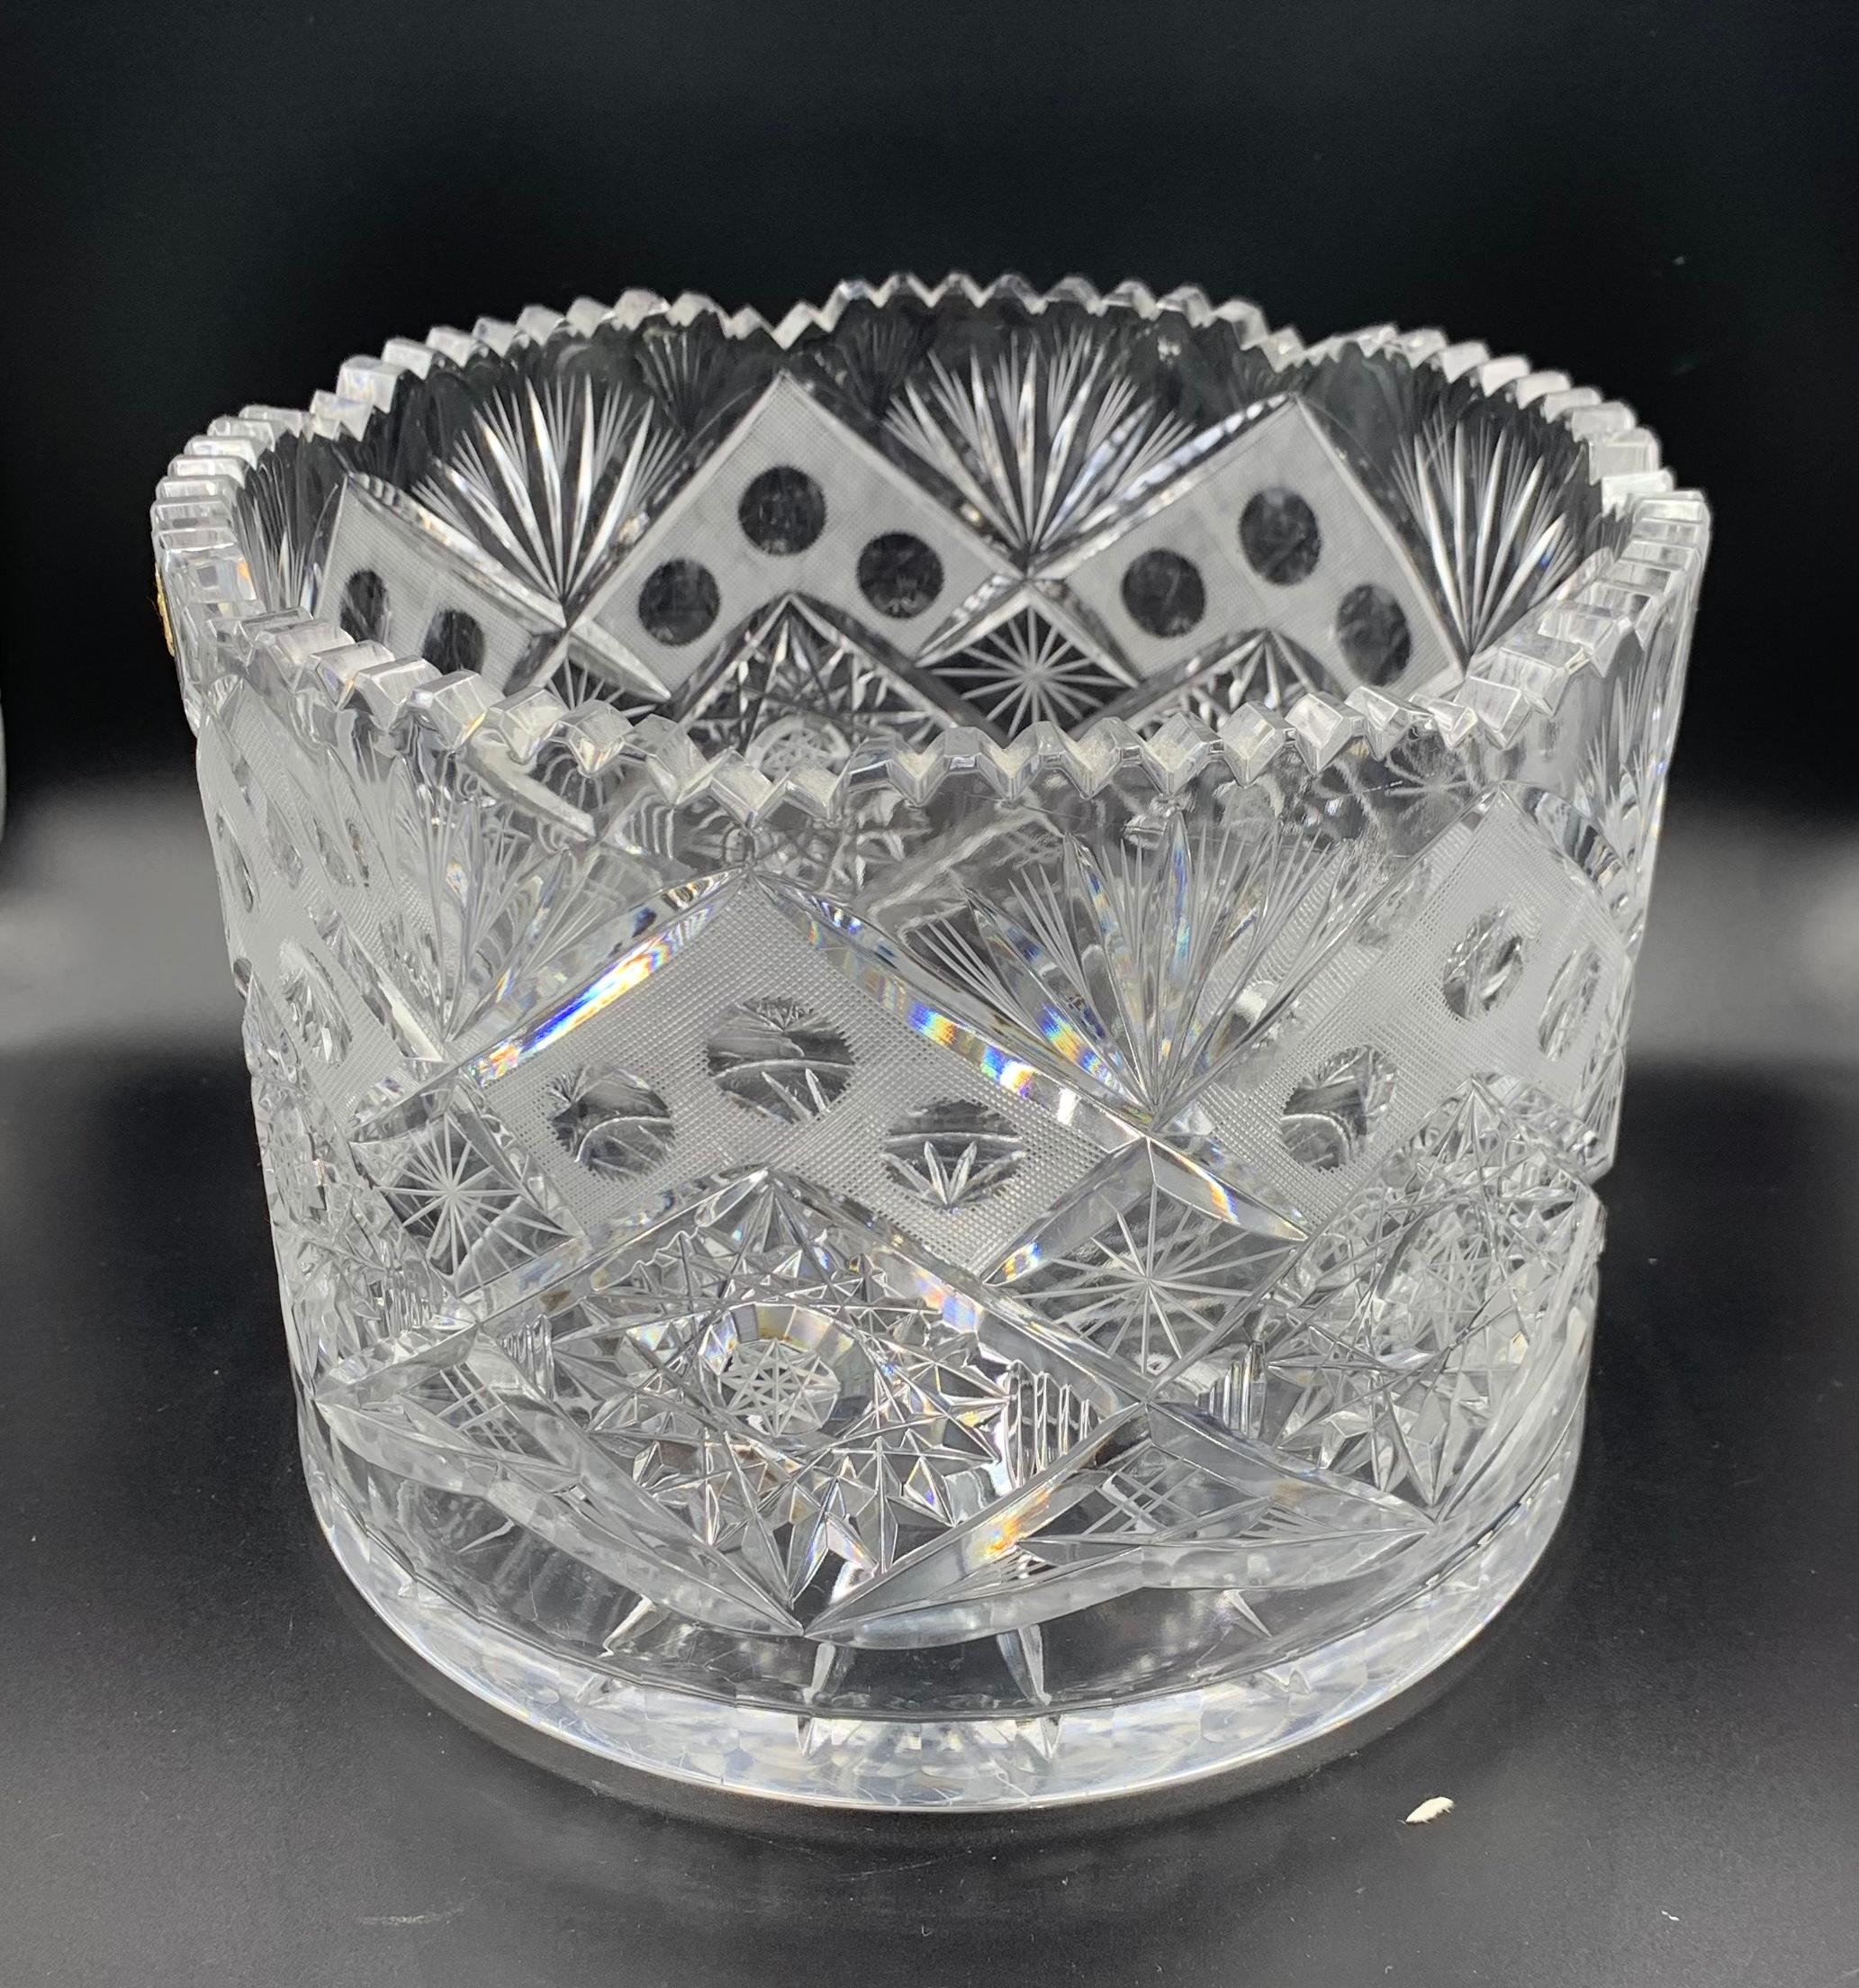 Gorgeous large heavy hand made crystal ice bucket / champaign wine cooler made in Czechoslovakia. This piece could also be used as a planter or as a bowl. The original gold tag is on the piece, but the tag is in worn condition.